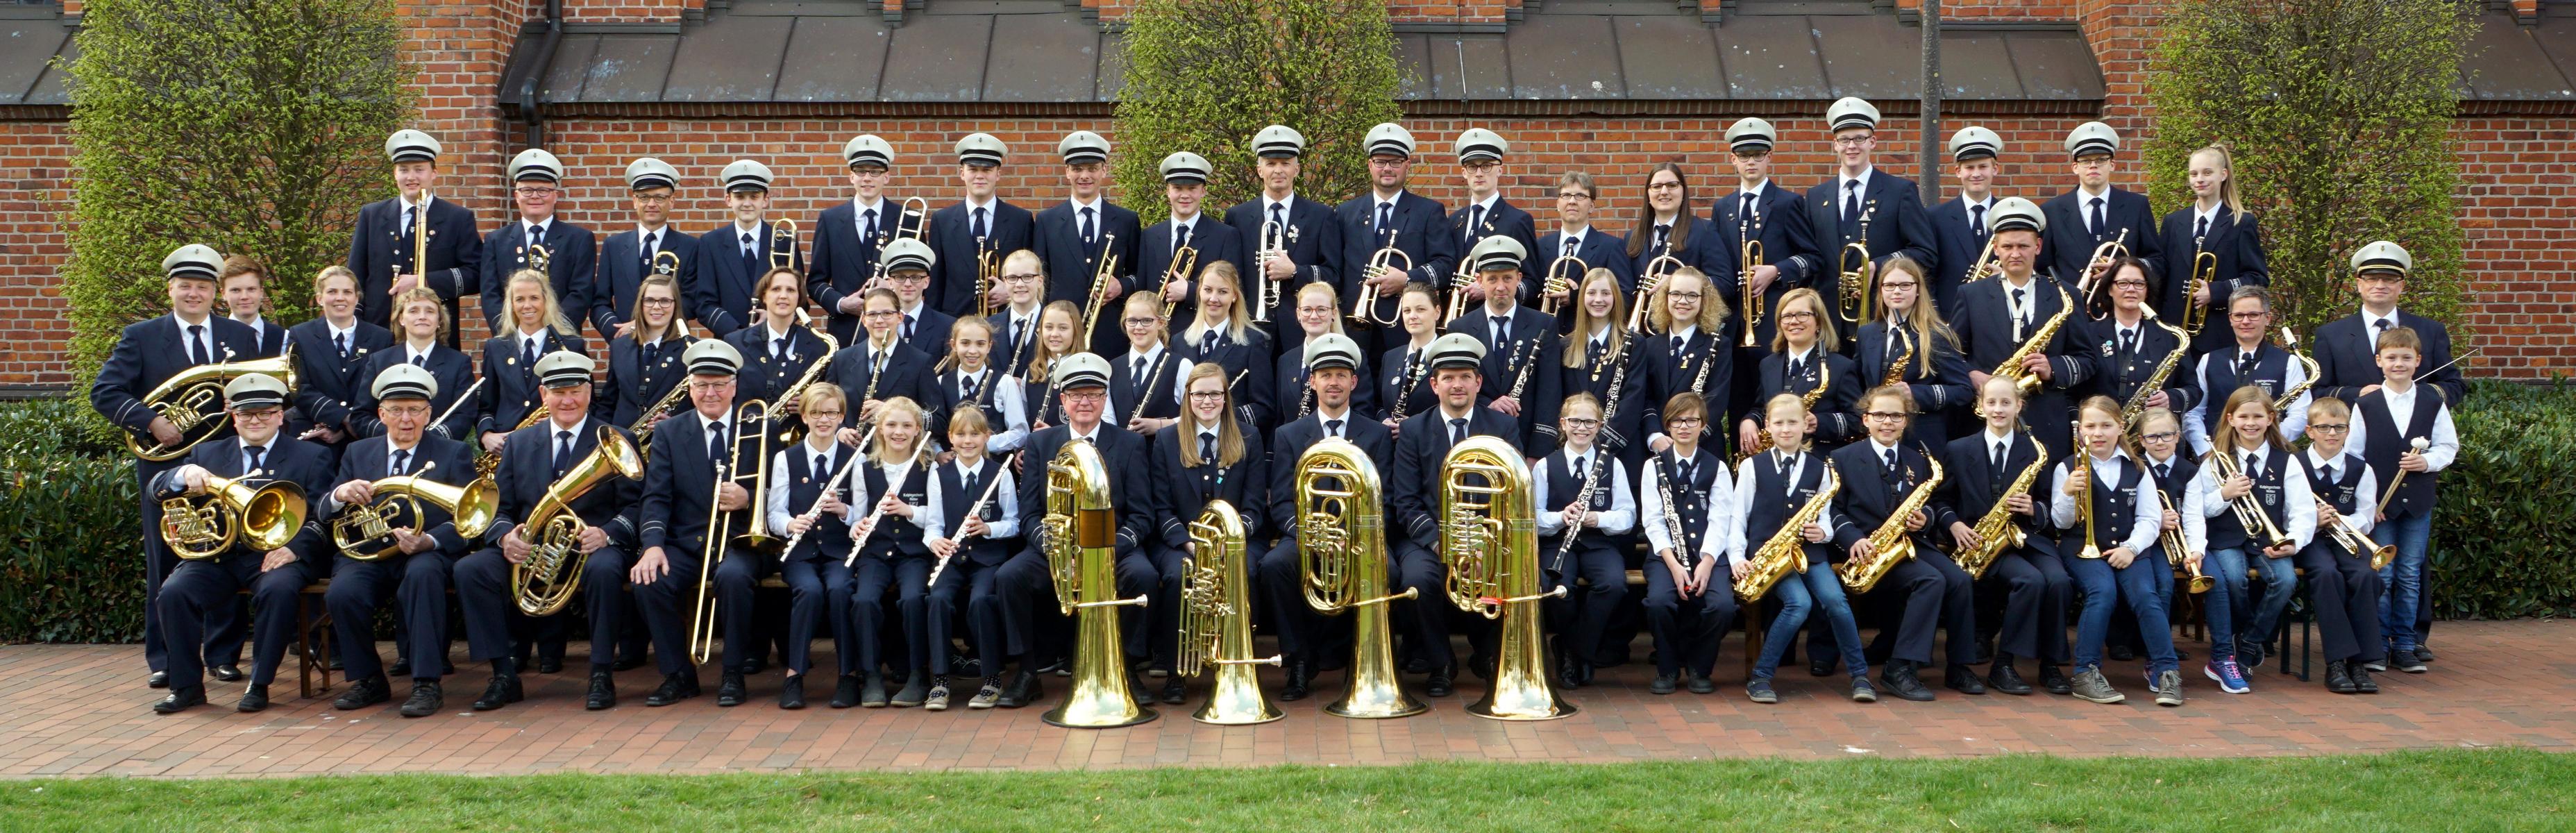 K1600 Orchester 2016